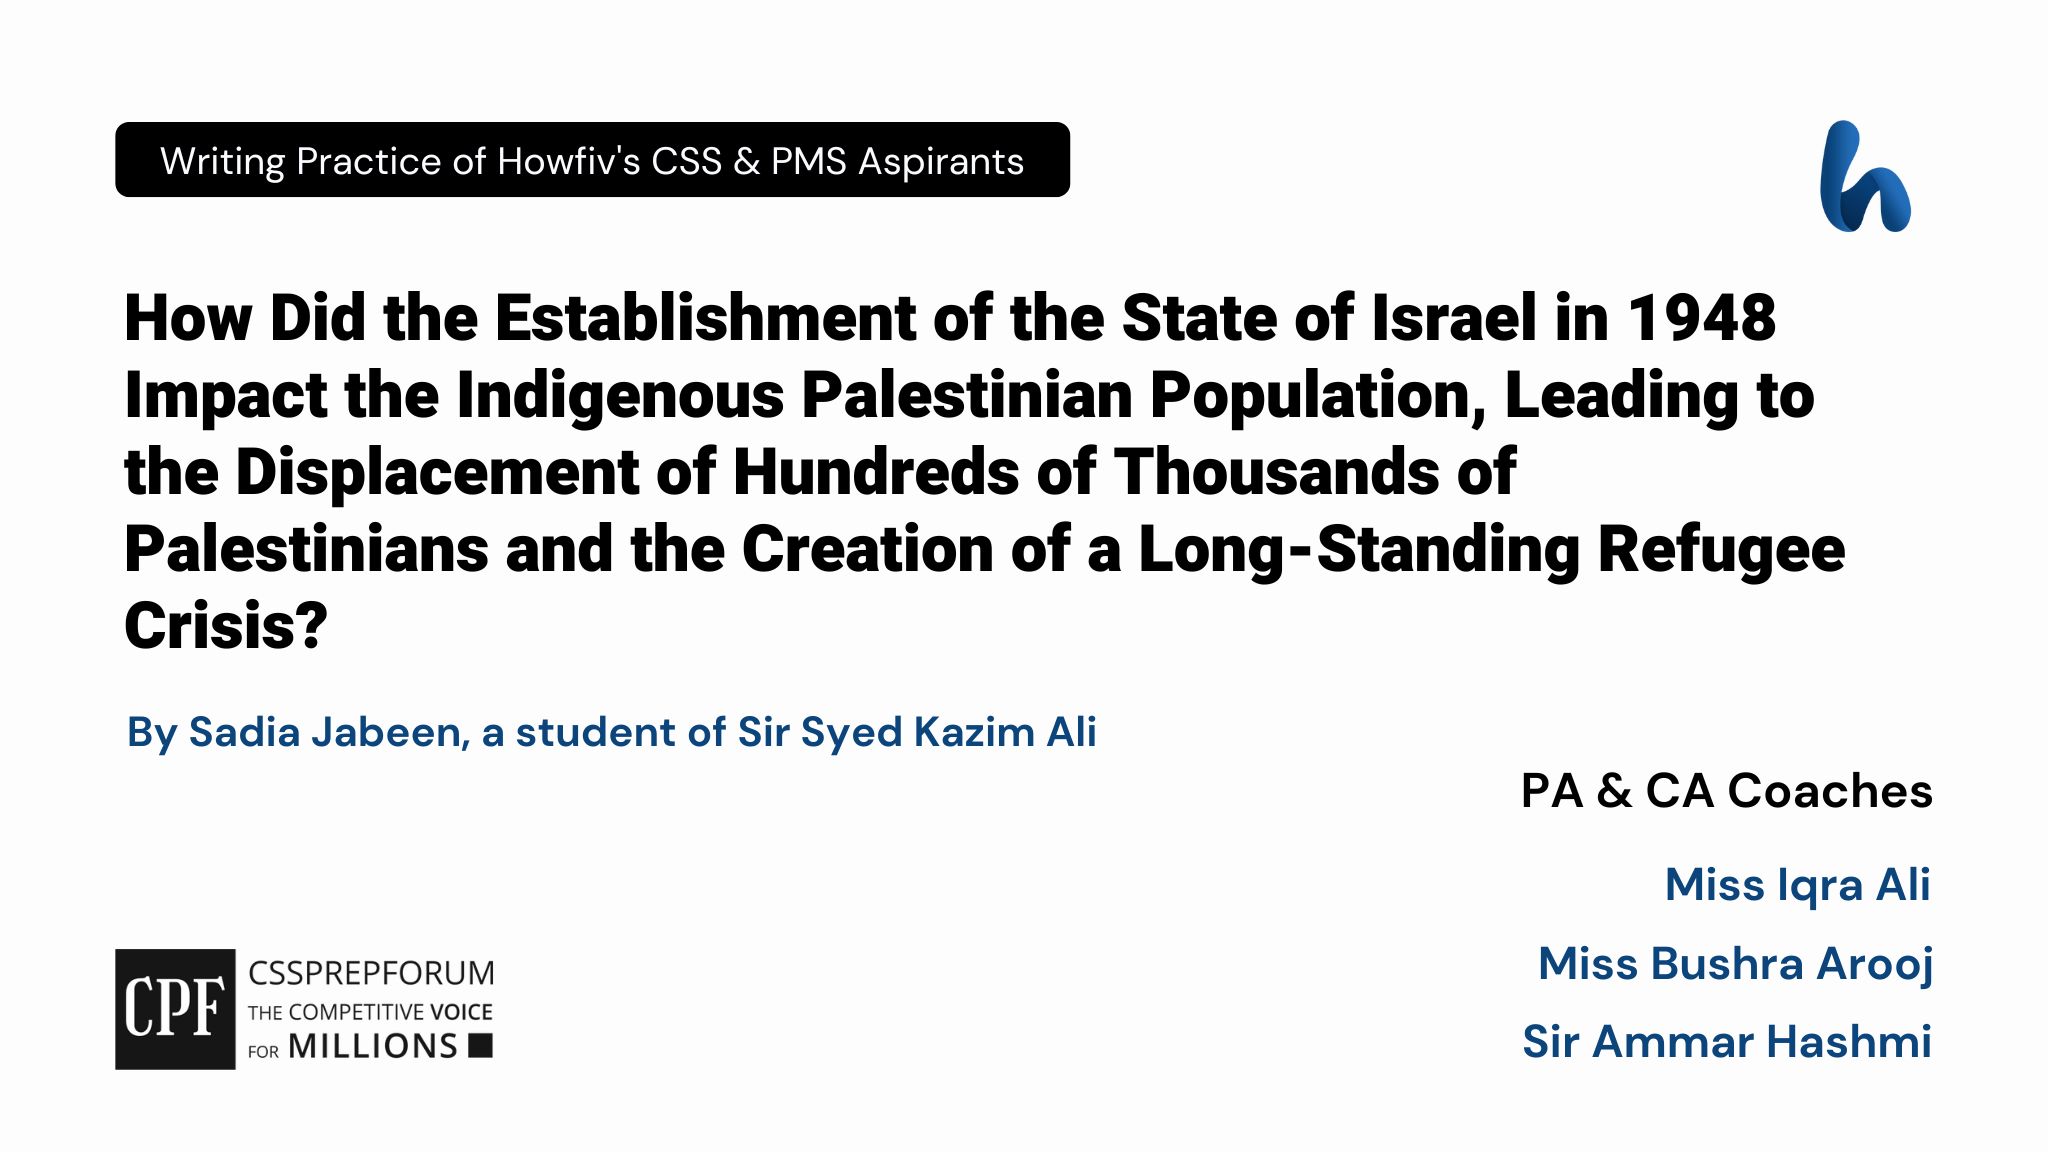 CSS Current Affairs article | Impacts of Israel Establishment on Palestinians | is written by Sadia Jabeen under the supervision of Sir Ammar Hashmi...